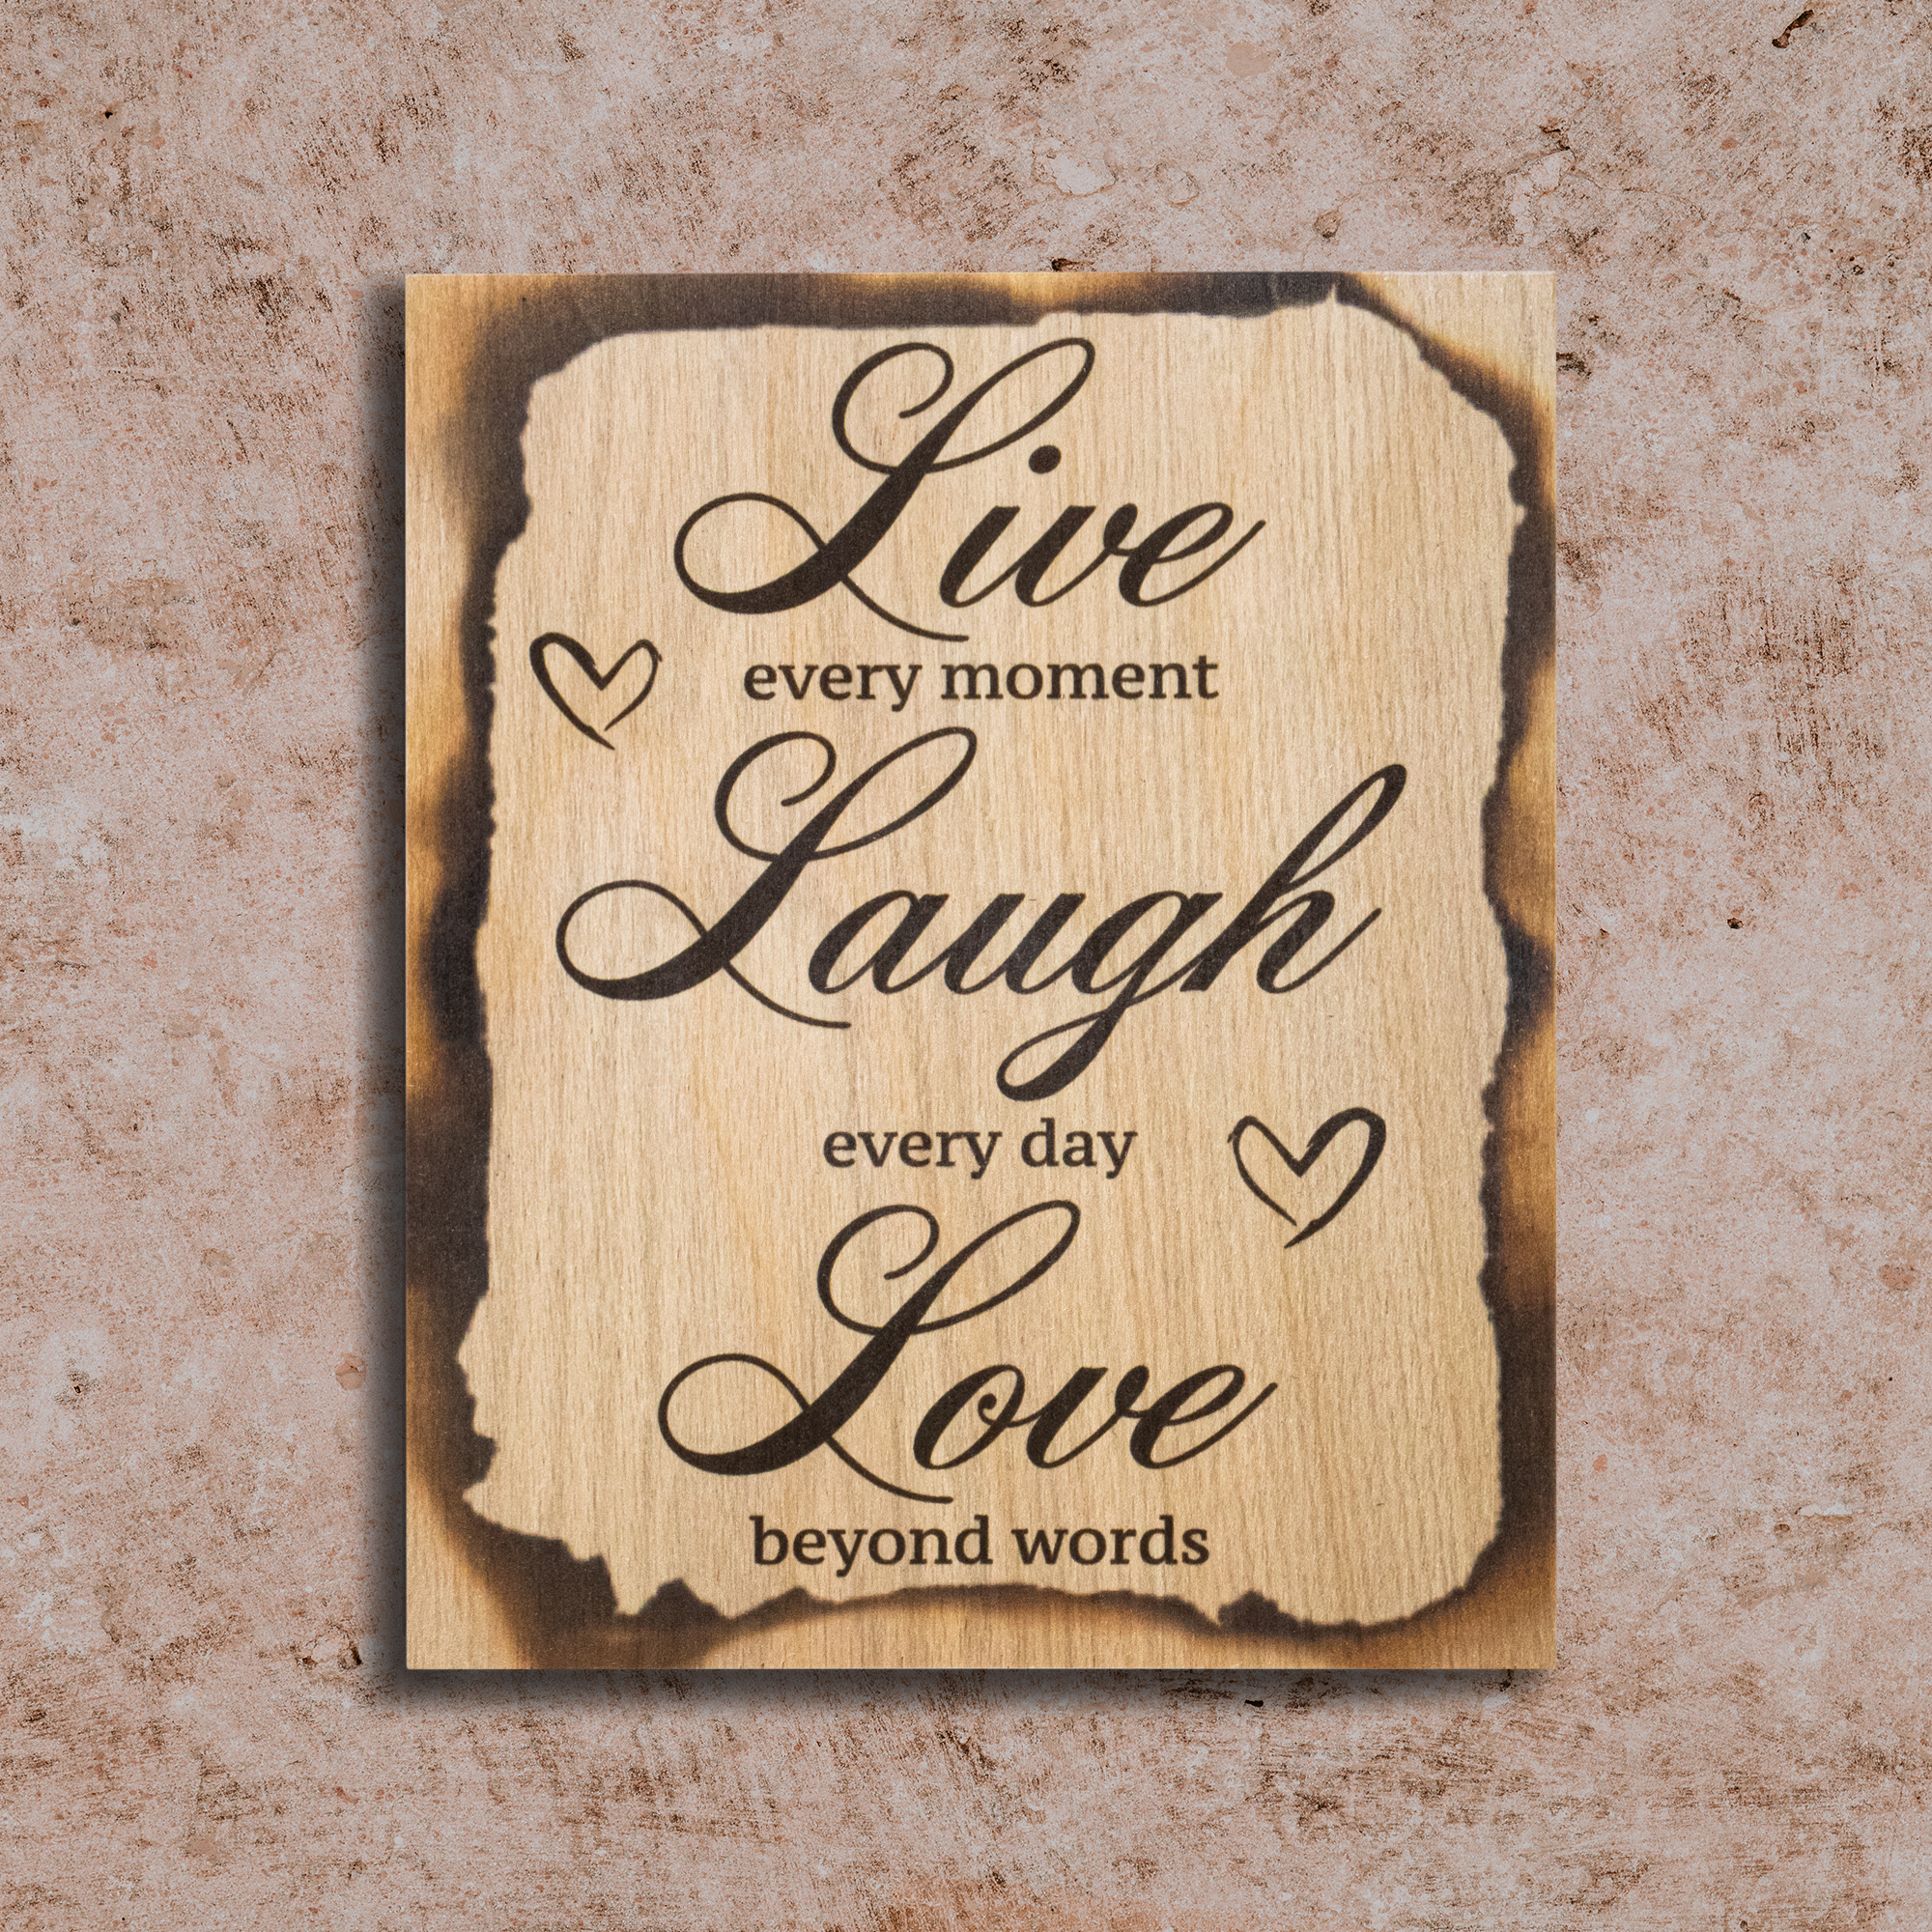 - Sign Wooden Day Live Words™️ Moment Love Beyond Laugh JennyGems Every Every